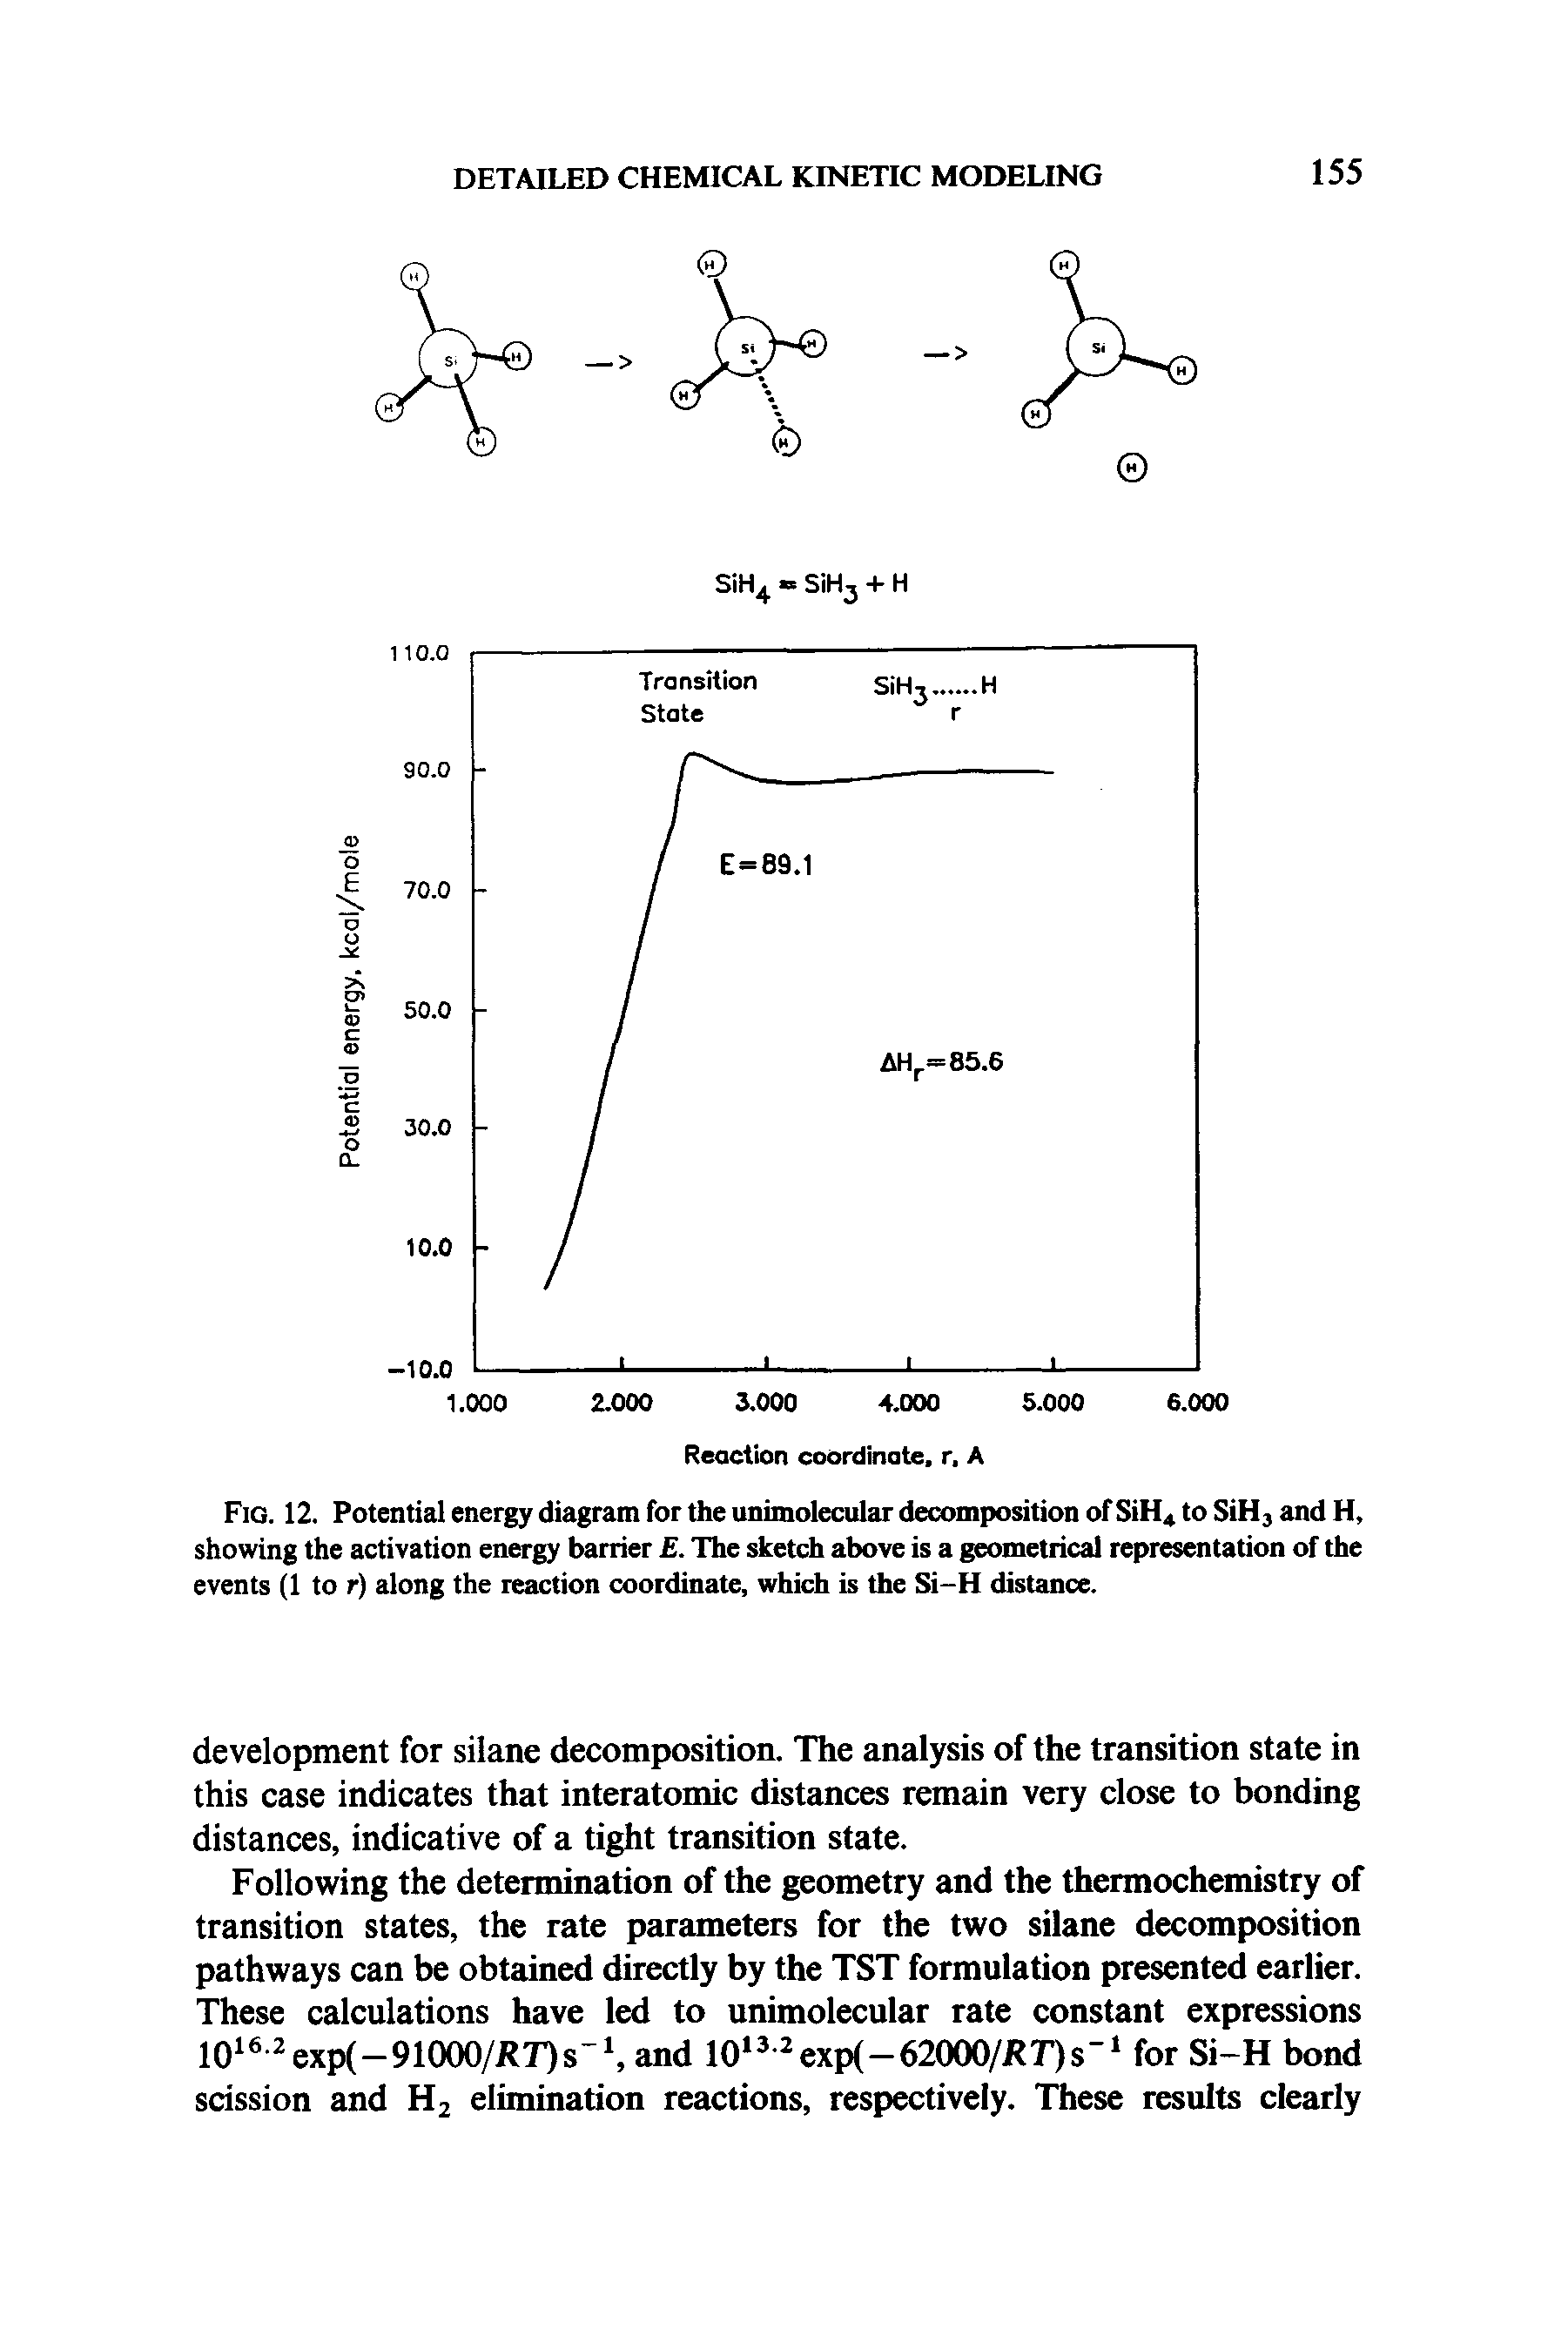 Fig. 12. Potential energy diagram for the unimolecular decomposition of SiH4 to SiHj and H, showing the activation energy barrier . The sketch above is a geometrical representation of the events (1 to r) along the reaction coordinate, which is the Si-H distance.